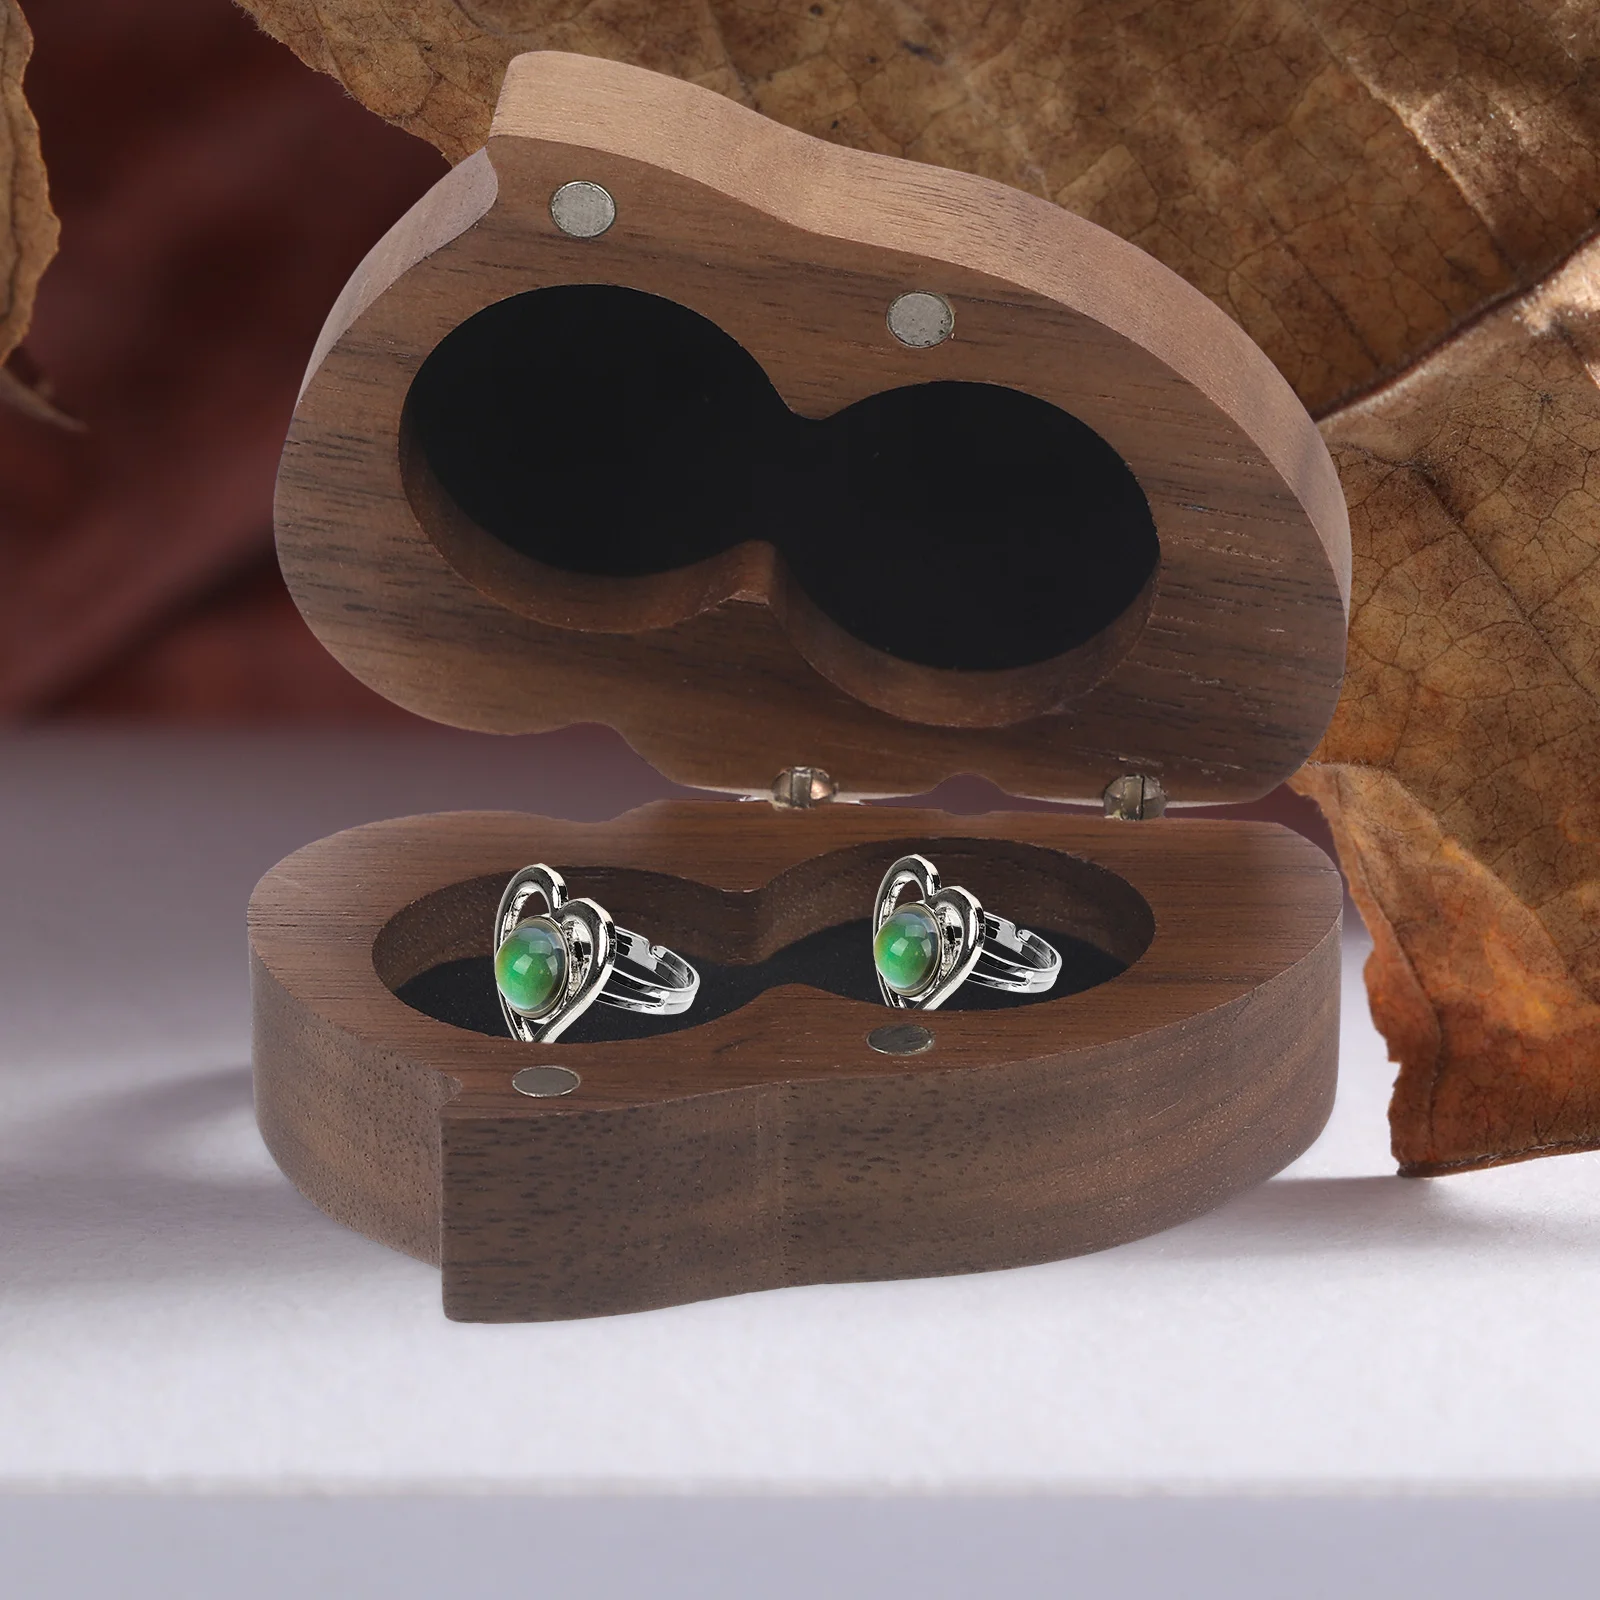 Jewelry Storage Box Ring Boxes for Gift Chinese Style Wood Rings Case Heart Wooden Wedding Shaped new arrival wooden 3layers rings bracelets necklaces storage handmade diy jewelry display stand ring makeup organzier wholesale